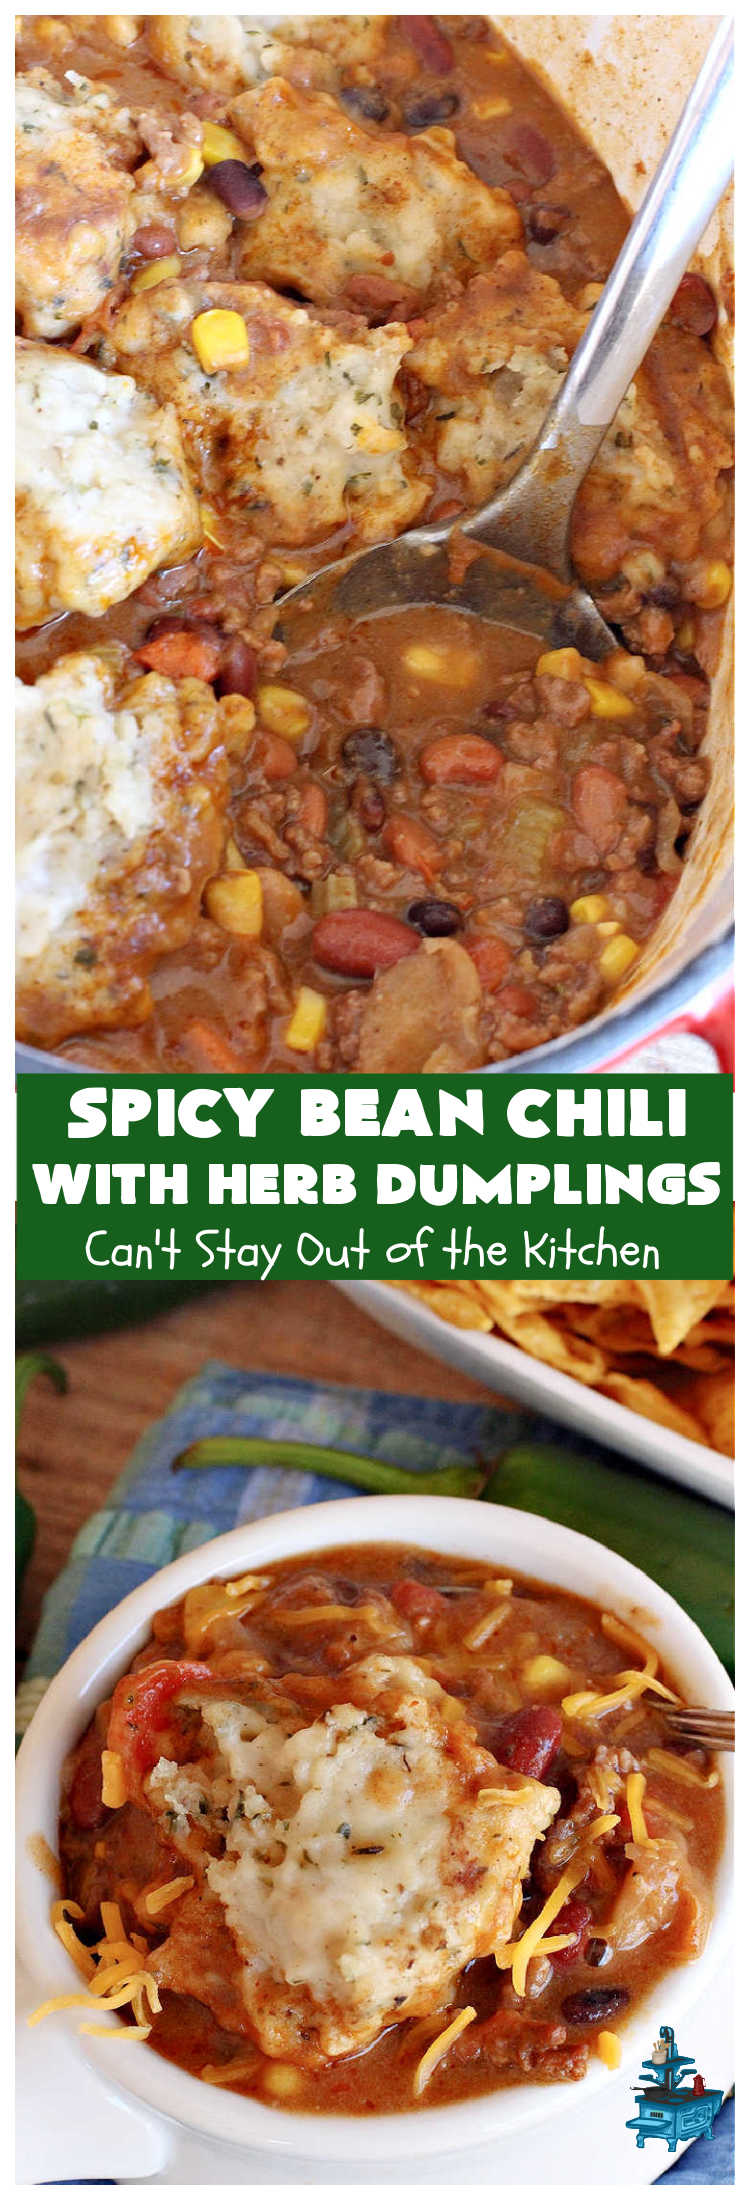 Spicy Bean Chili with Herb Dumplings | Can't Stay Out of the Kitchen